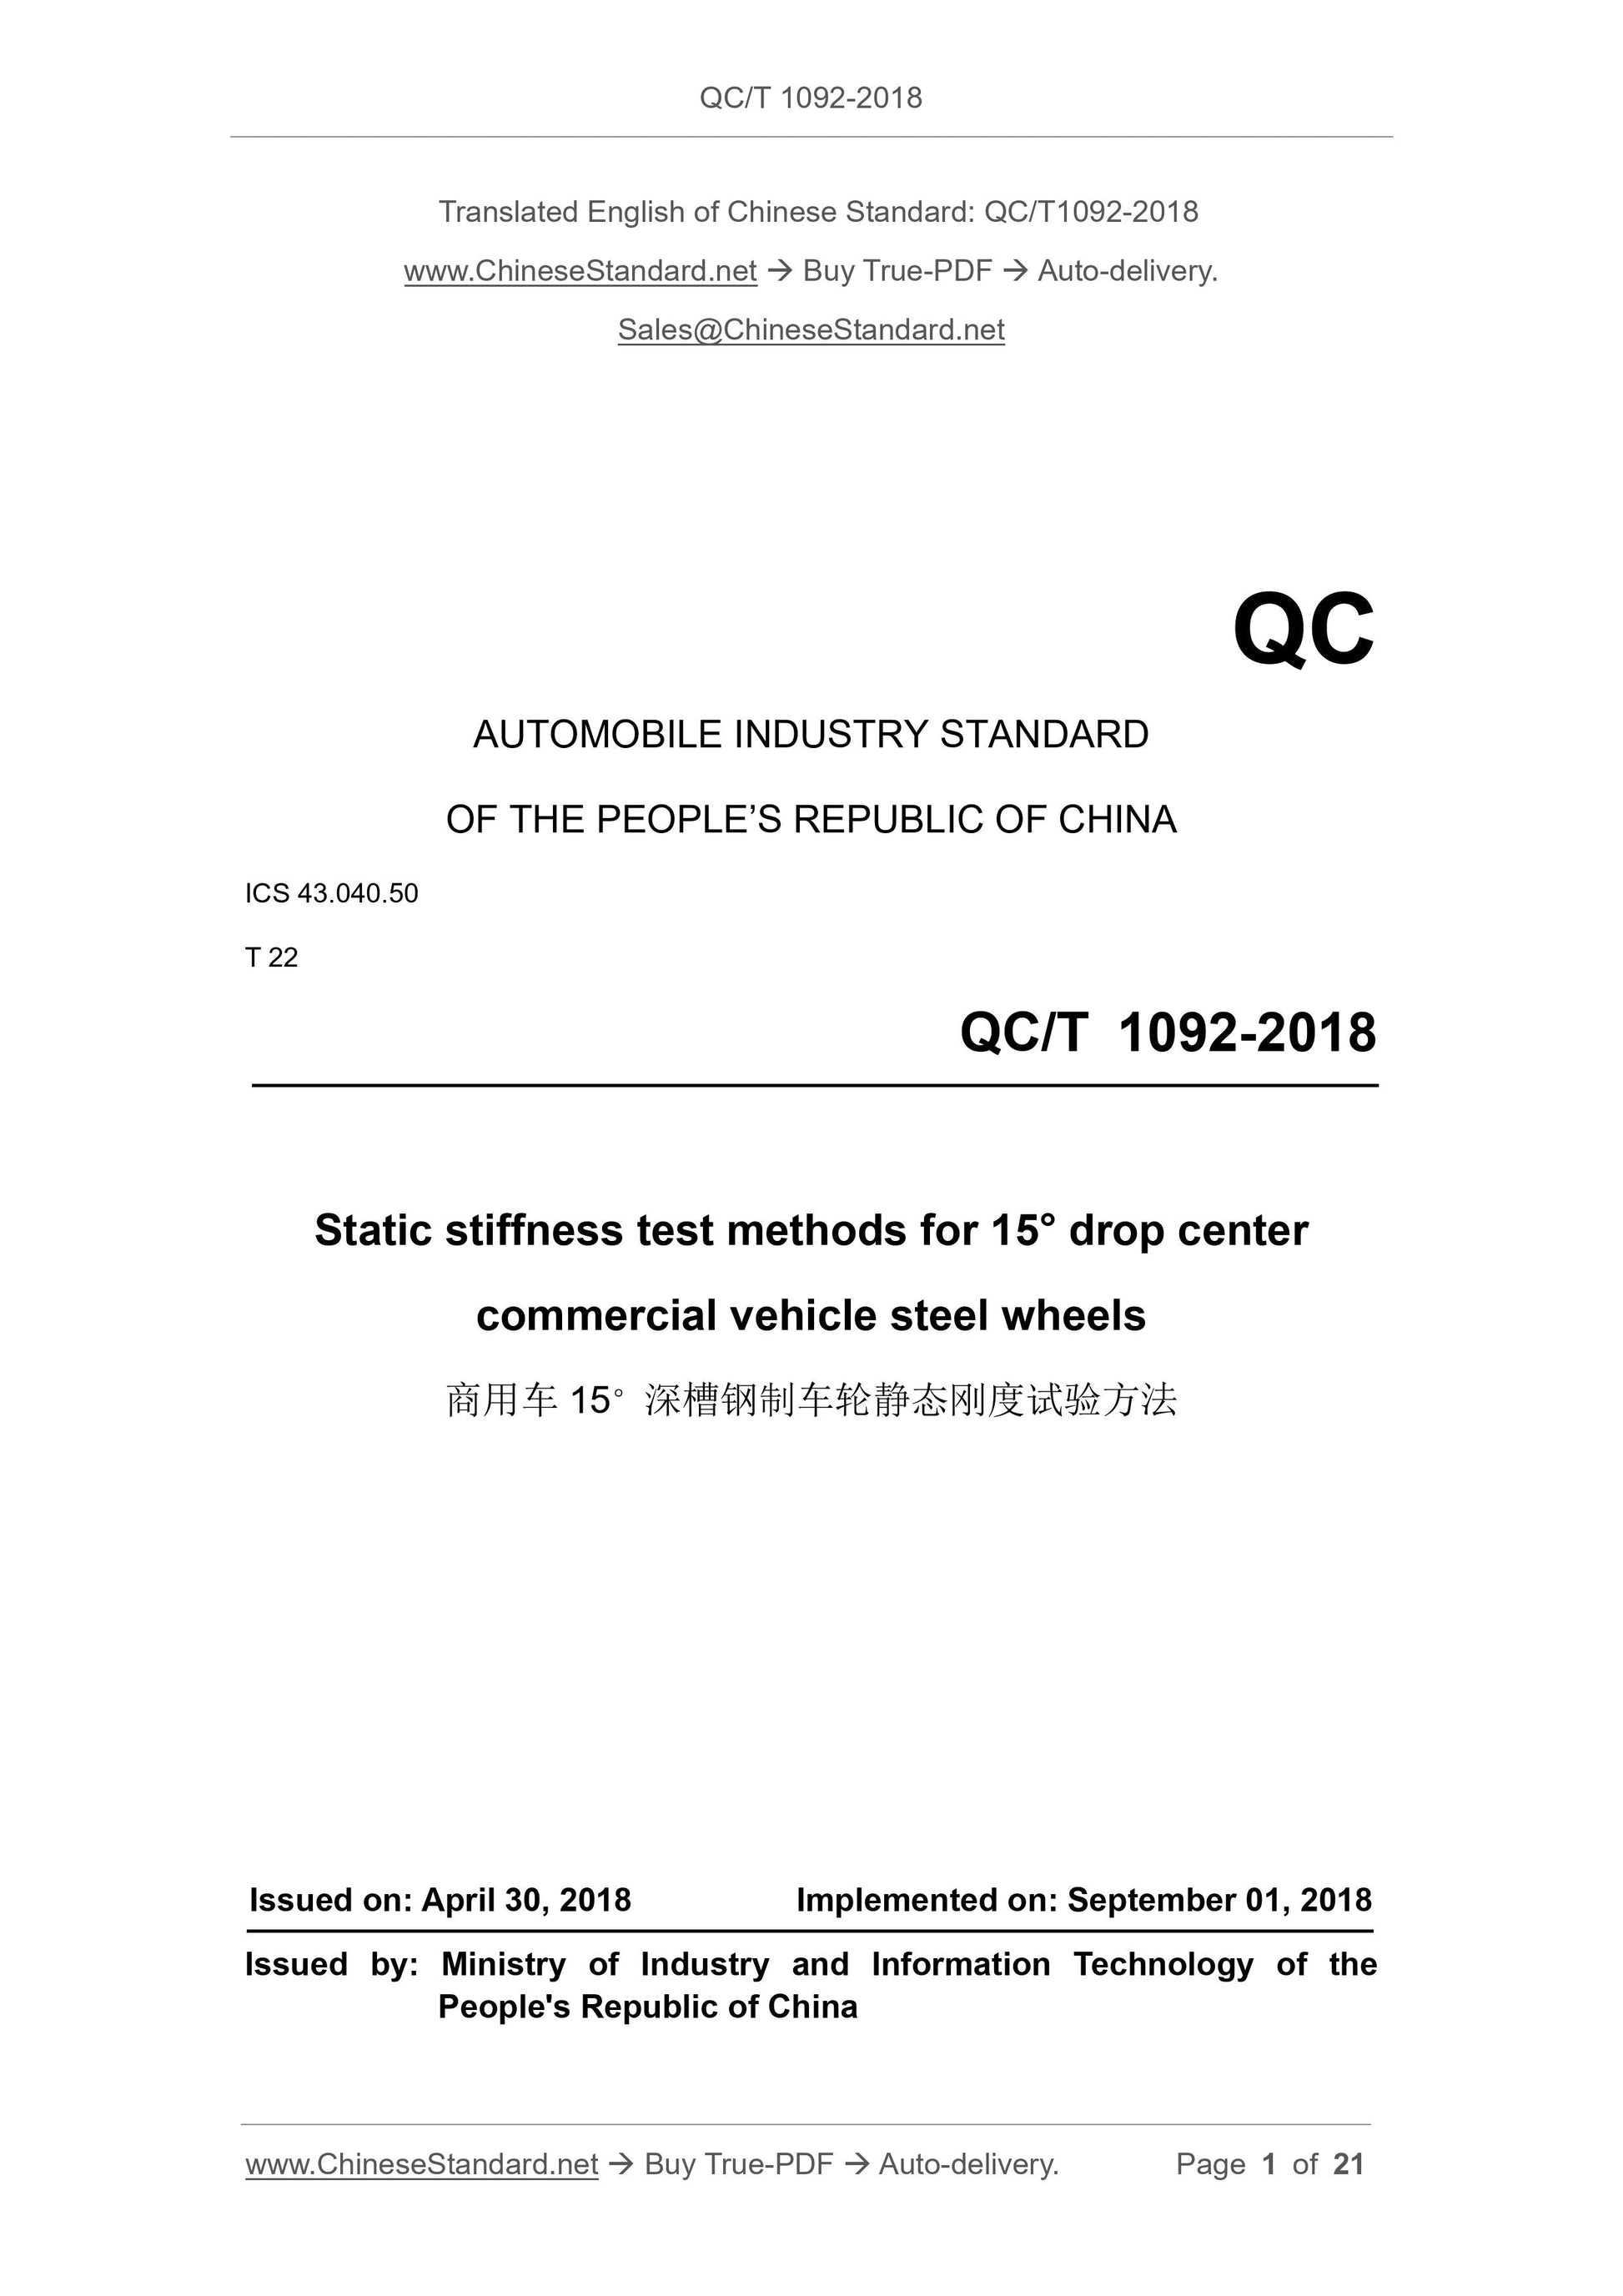 QC/T 1092-2018 Page 1